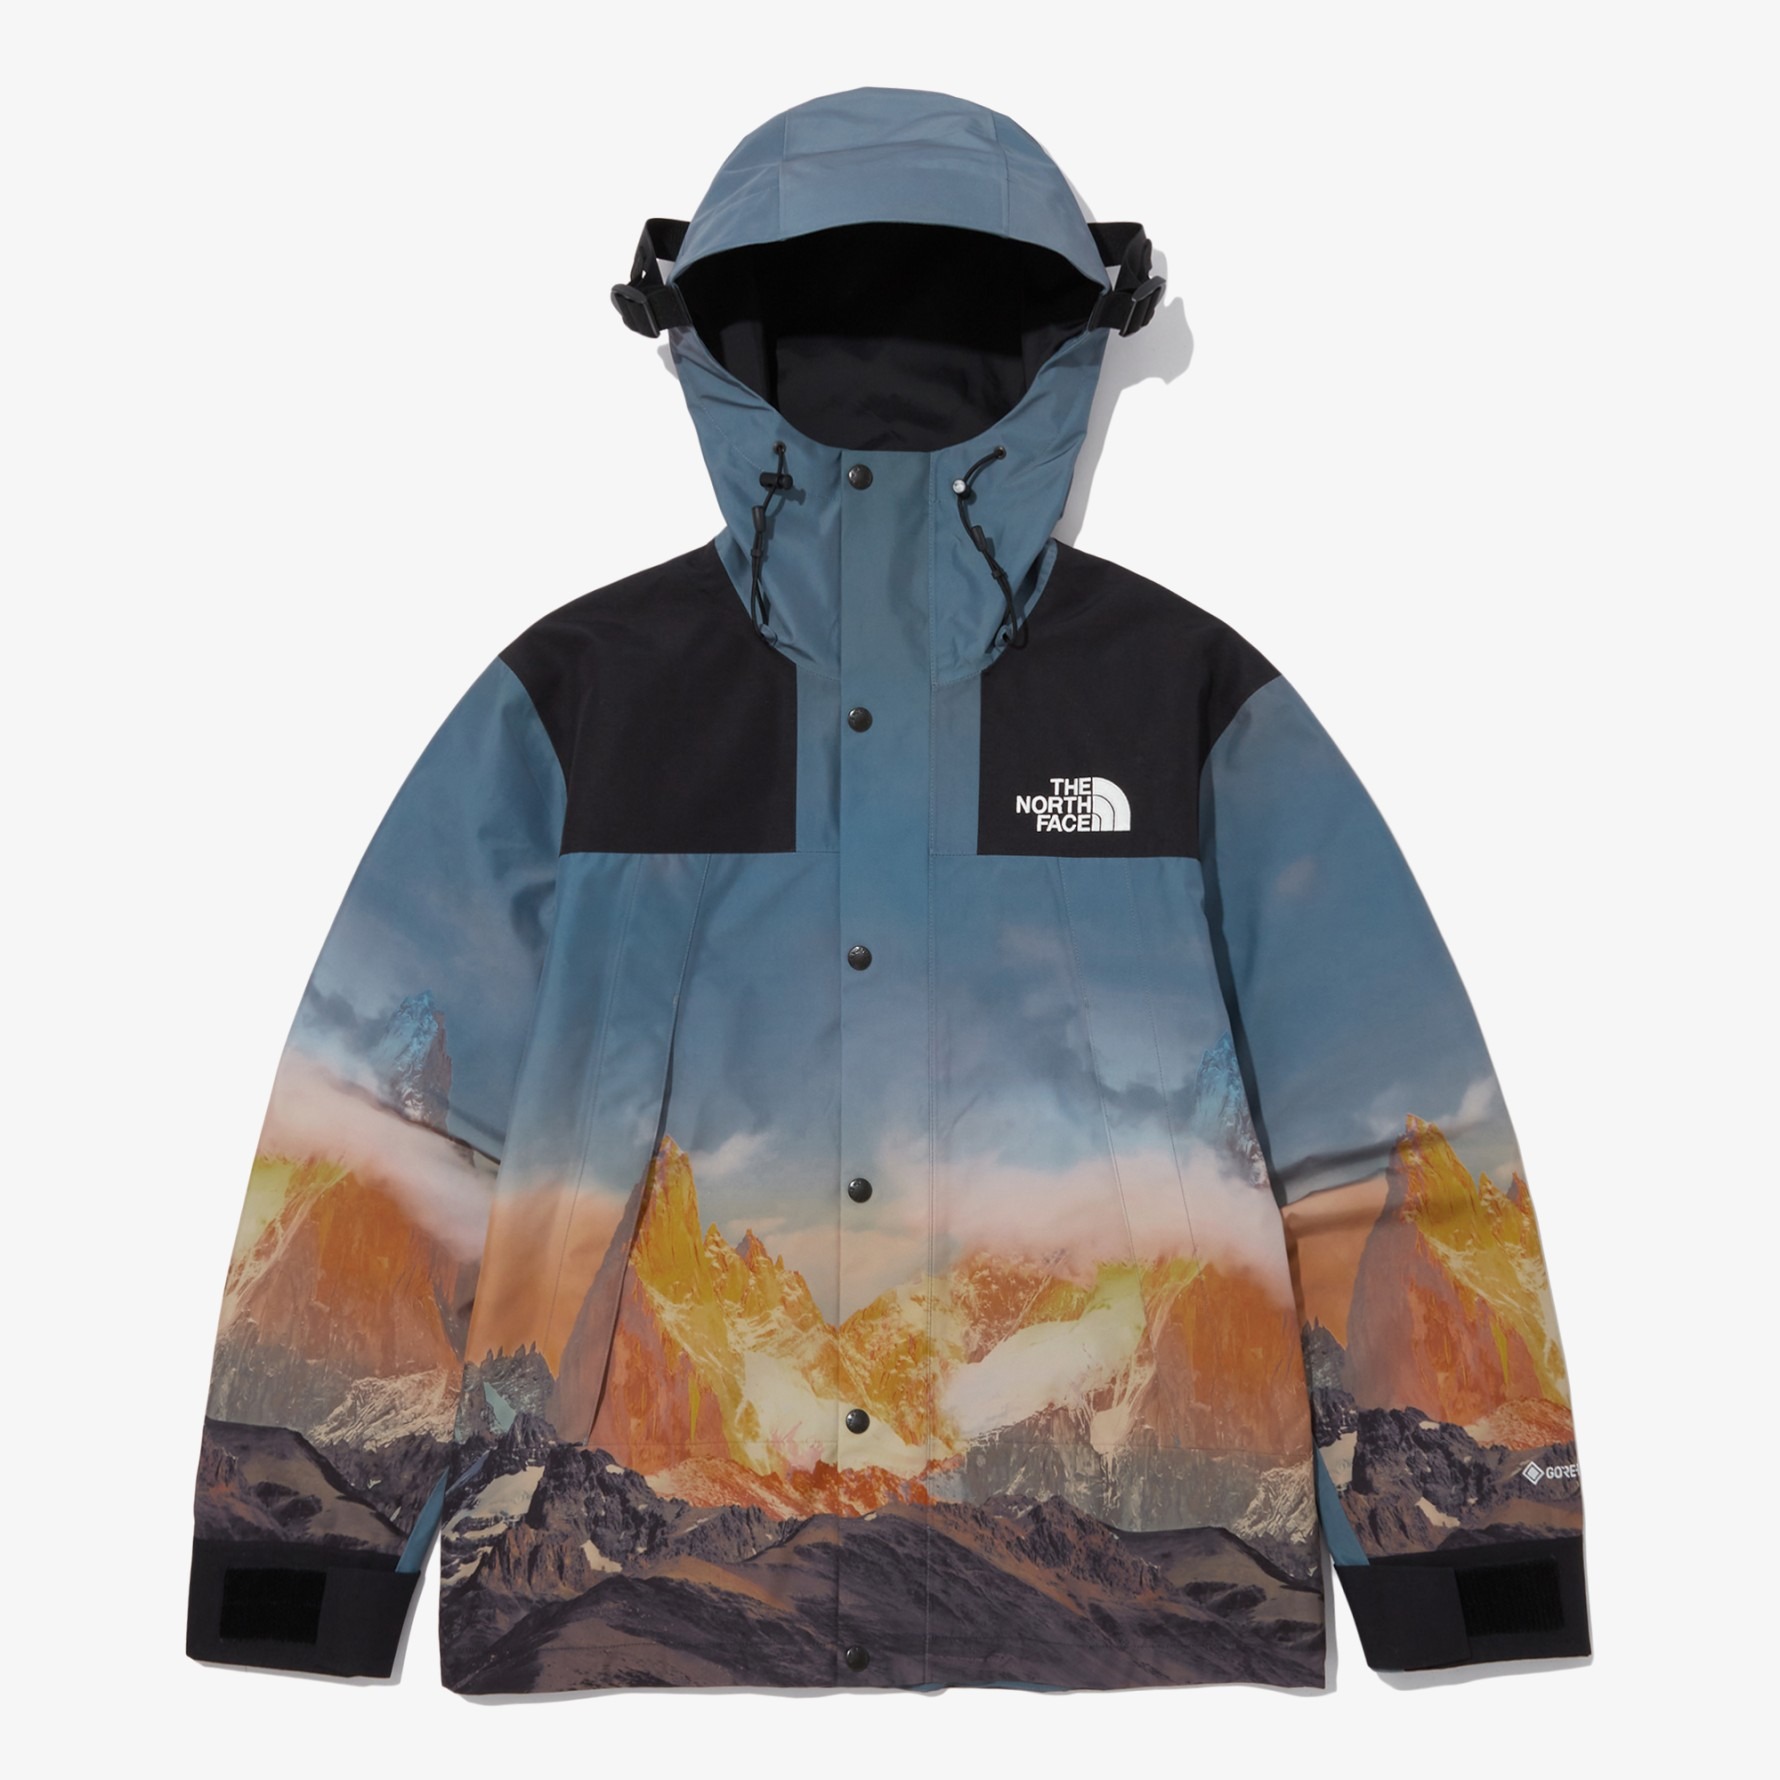 The North Face's Mountain Vista GORE-TEX Jackets Are Gorgeous